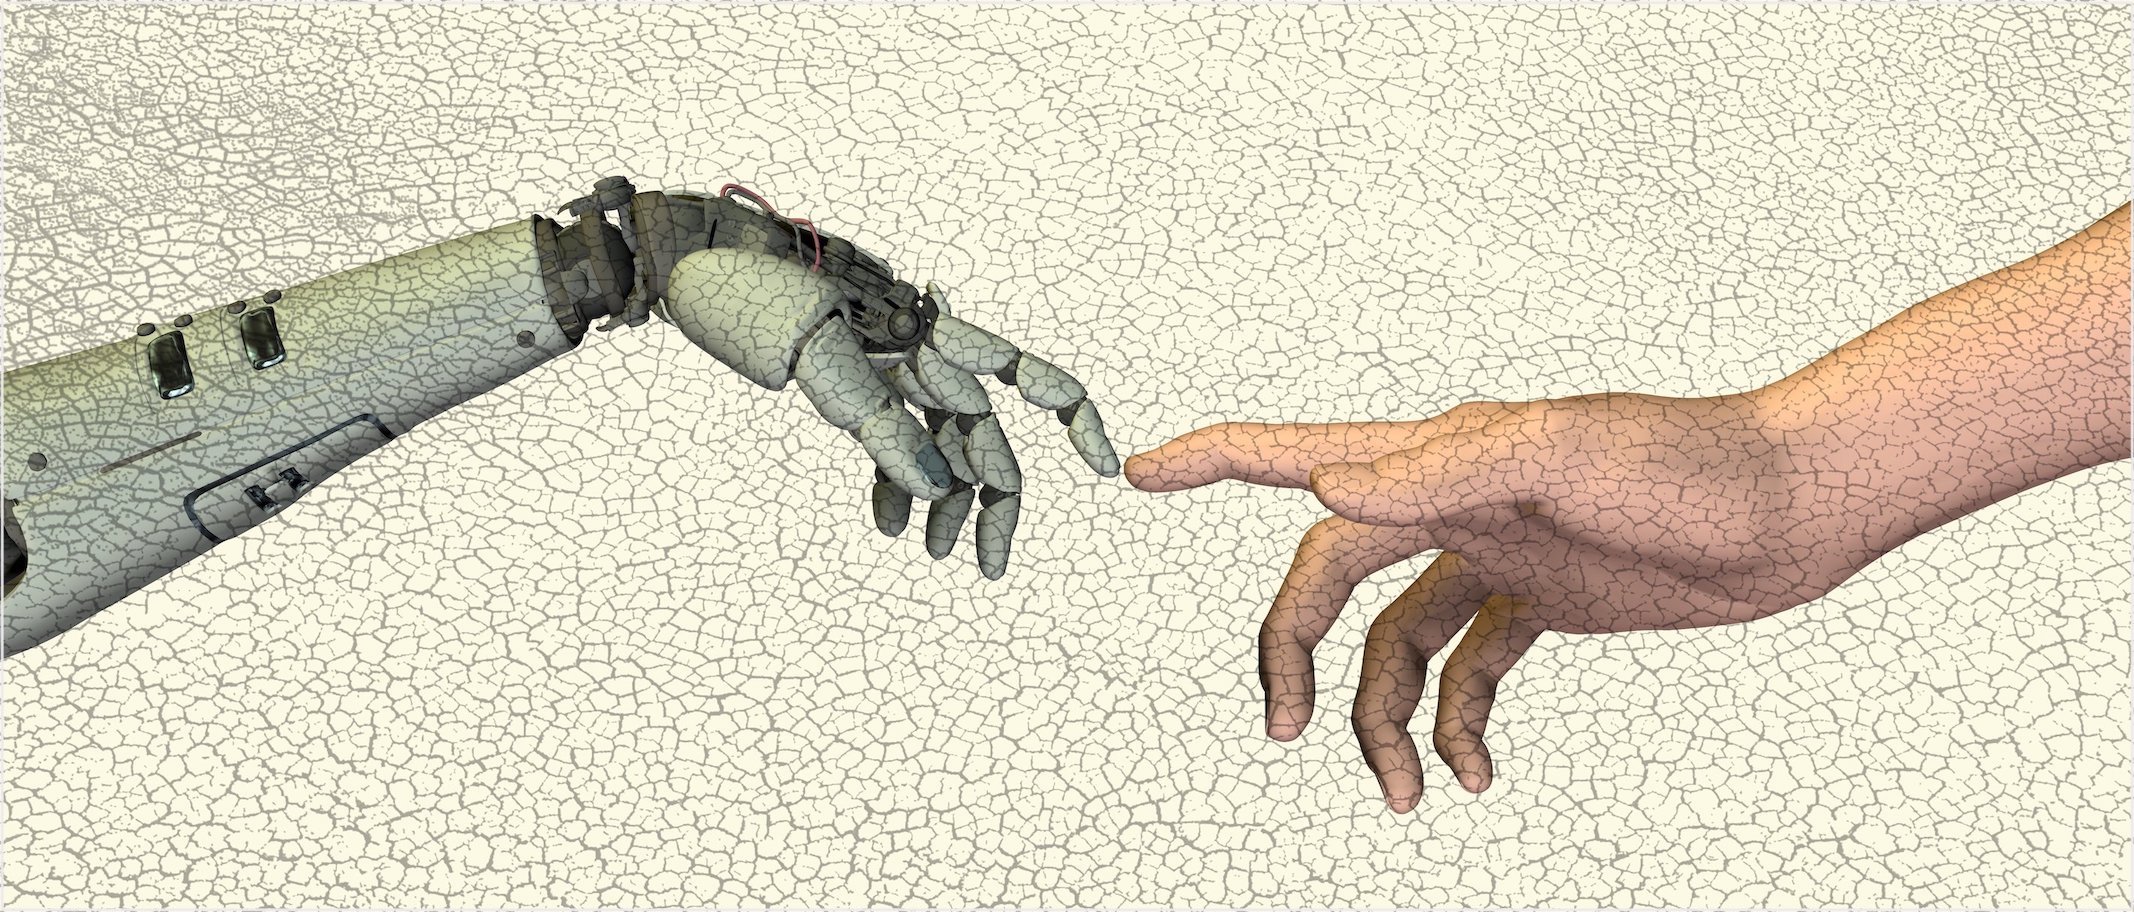 Artificial intelligence, conceptual computer artwork. Human hand (right) touching fingers with a robot's hand (left), mimicking Michelangelo's painting The Creation of Adam (in the Sistine Chapel, Rome, Italy) where two pointing hands meeting signify the biblical story of the creation of Adam by God. This image could symbolise humans creating robots.